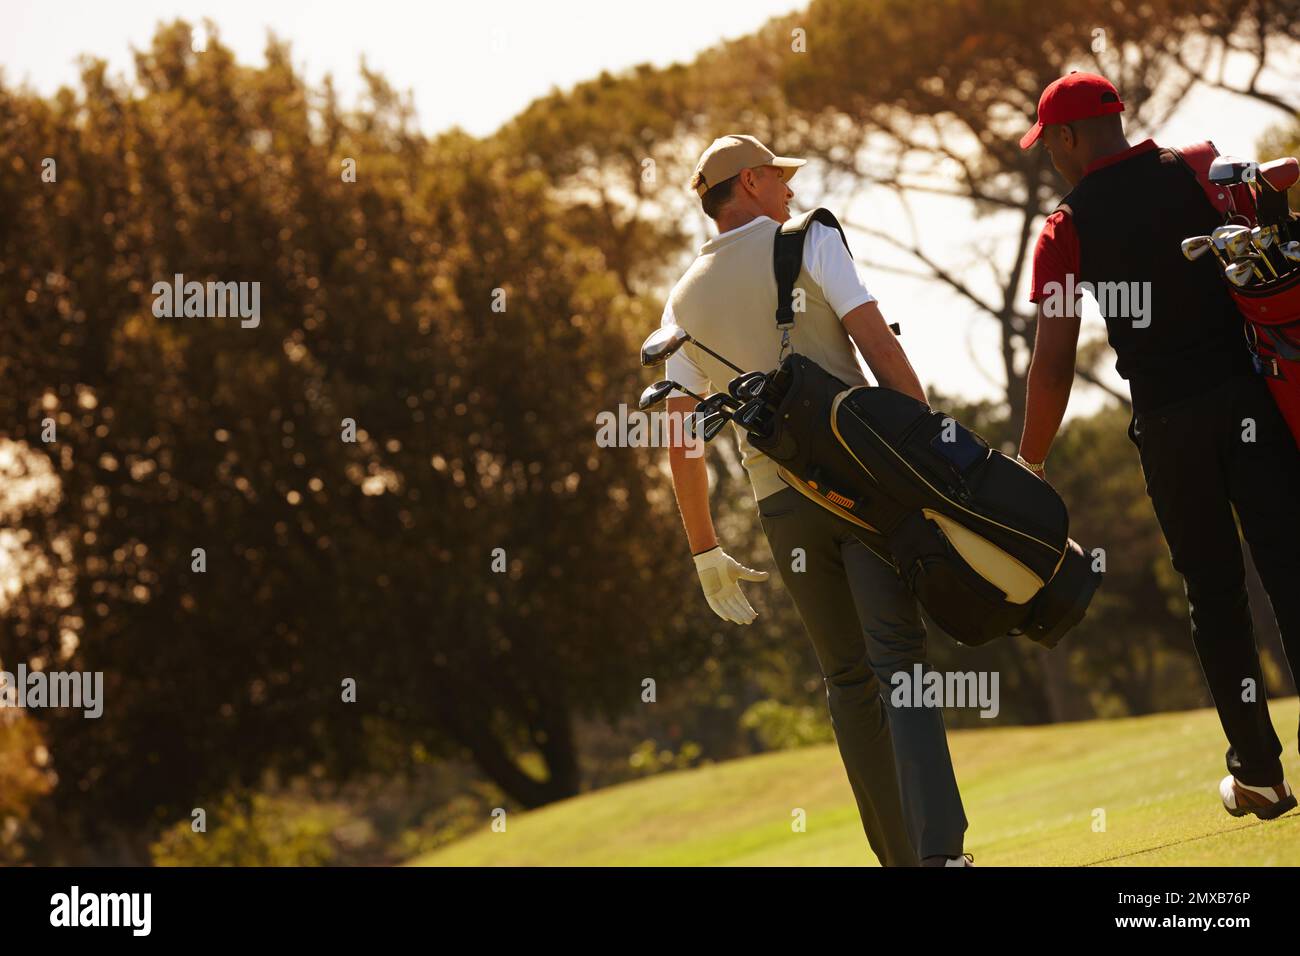 That was the best game of golf weve had. Rear view shot of two men carrying their golf bags across a golf course. Stock Photo